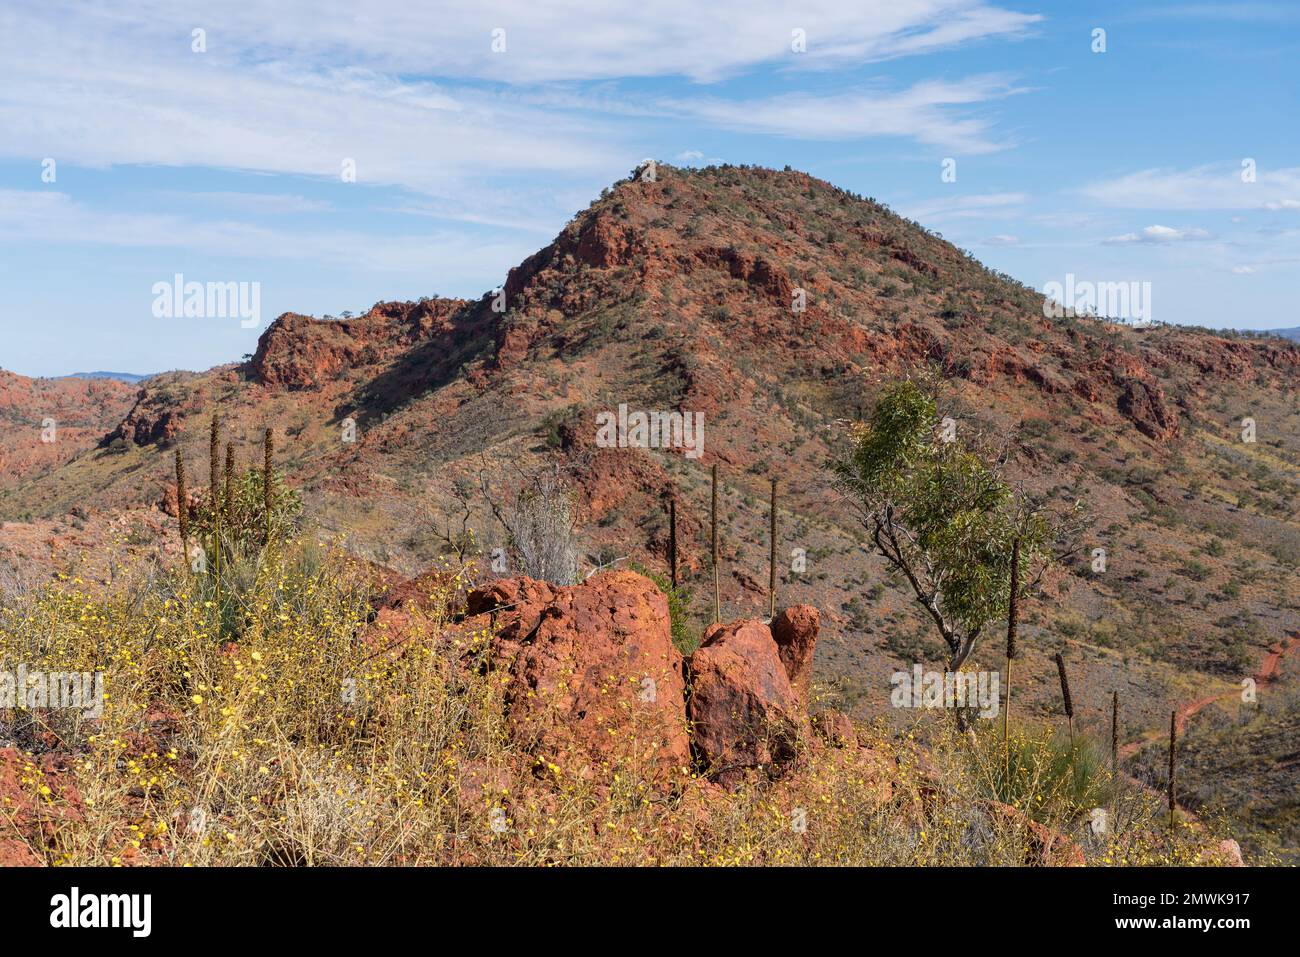 A beautiful view of Mount Painter in Arkaroola, South Australia. Stock Photo